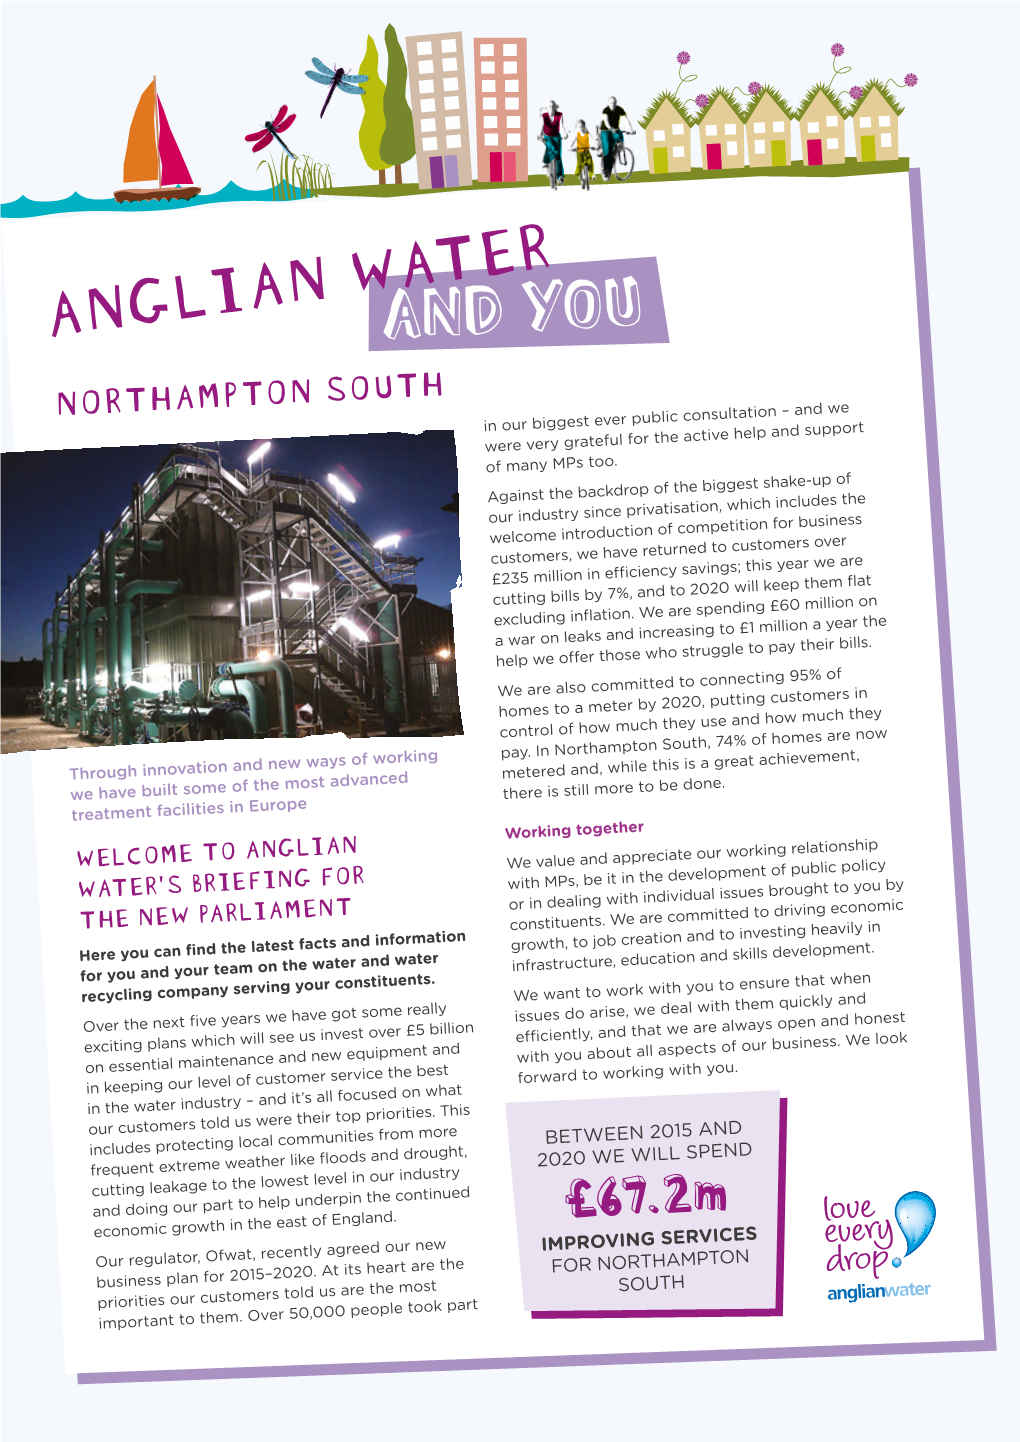 ANGLIAN WATERAND YOU NORTHAMPTON SOUTH in Our Biggest Ever Public Consultation – and We Were Very Grateful for the Active Help and Support of Many Mps Too